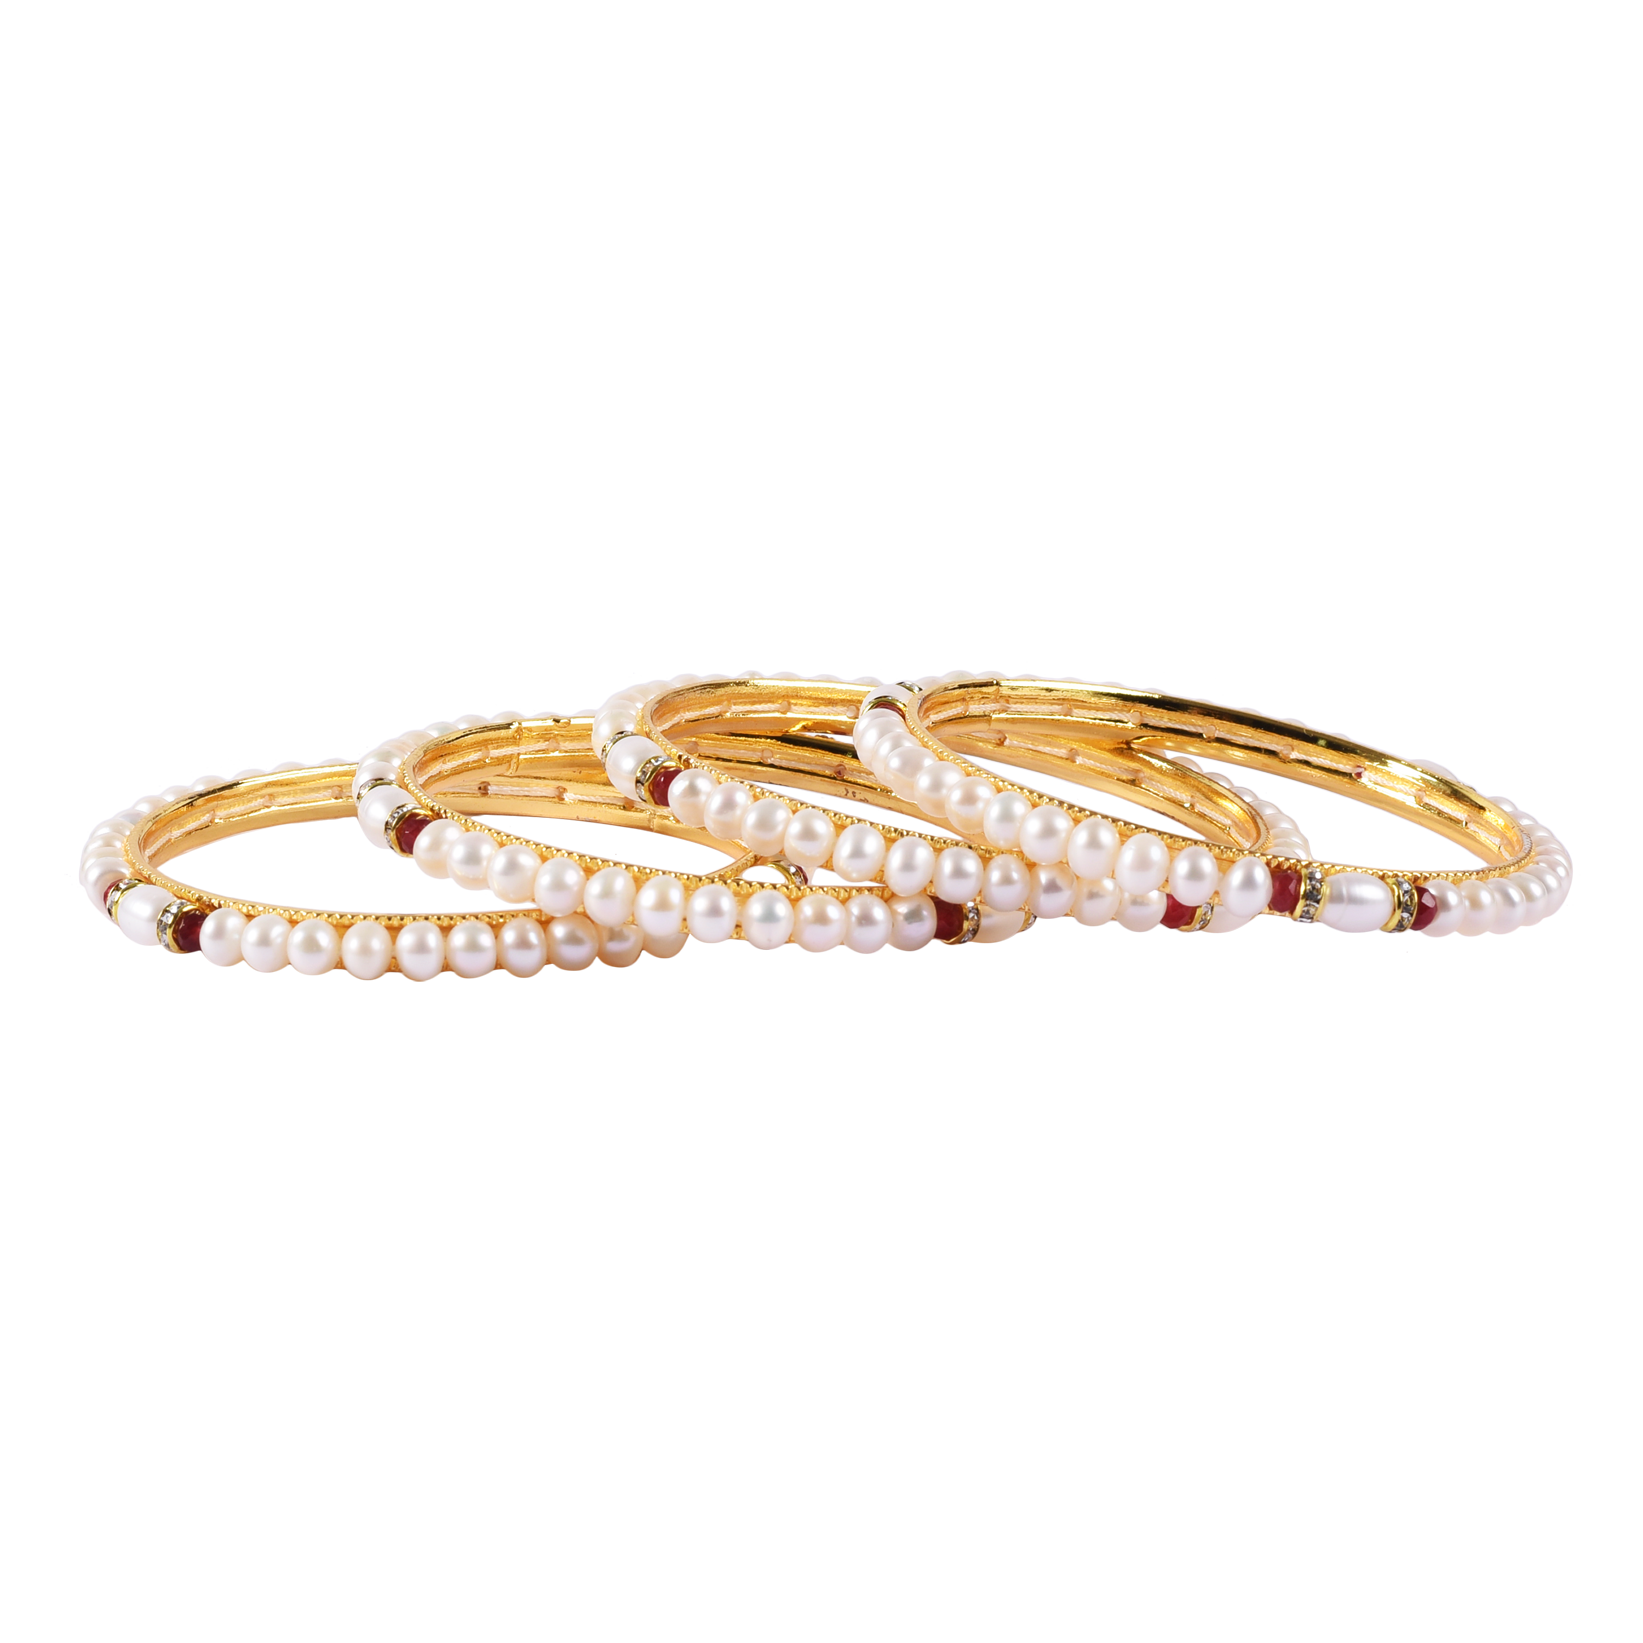 Buy Real Hyderabad Pearl Jewellery Online. Best Place To Buy Pearls.